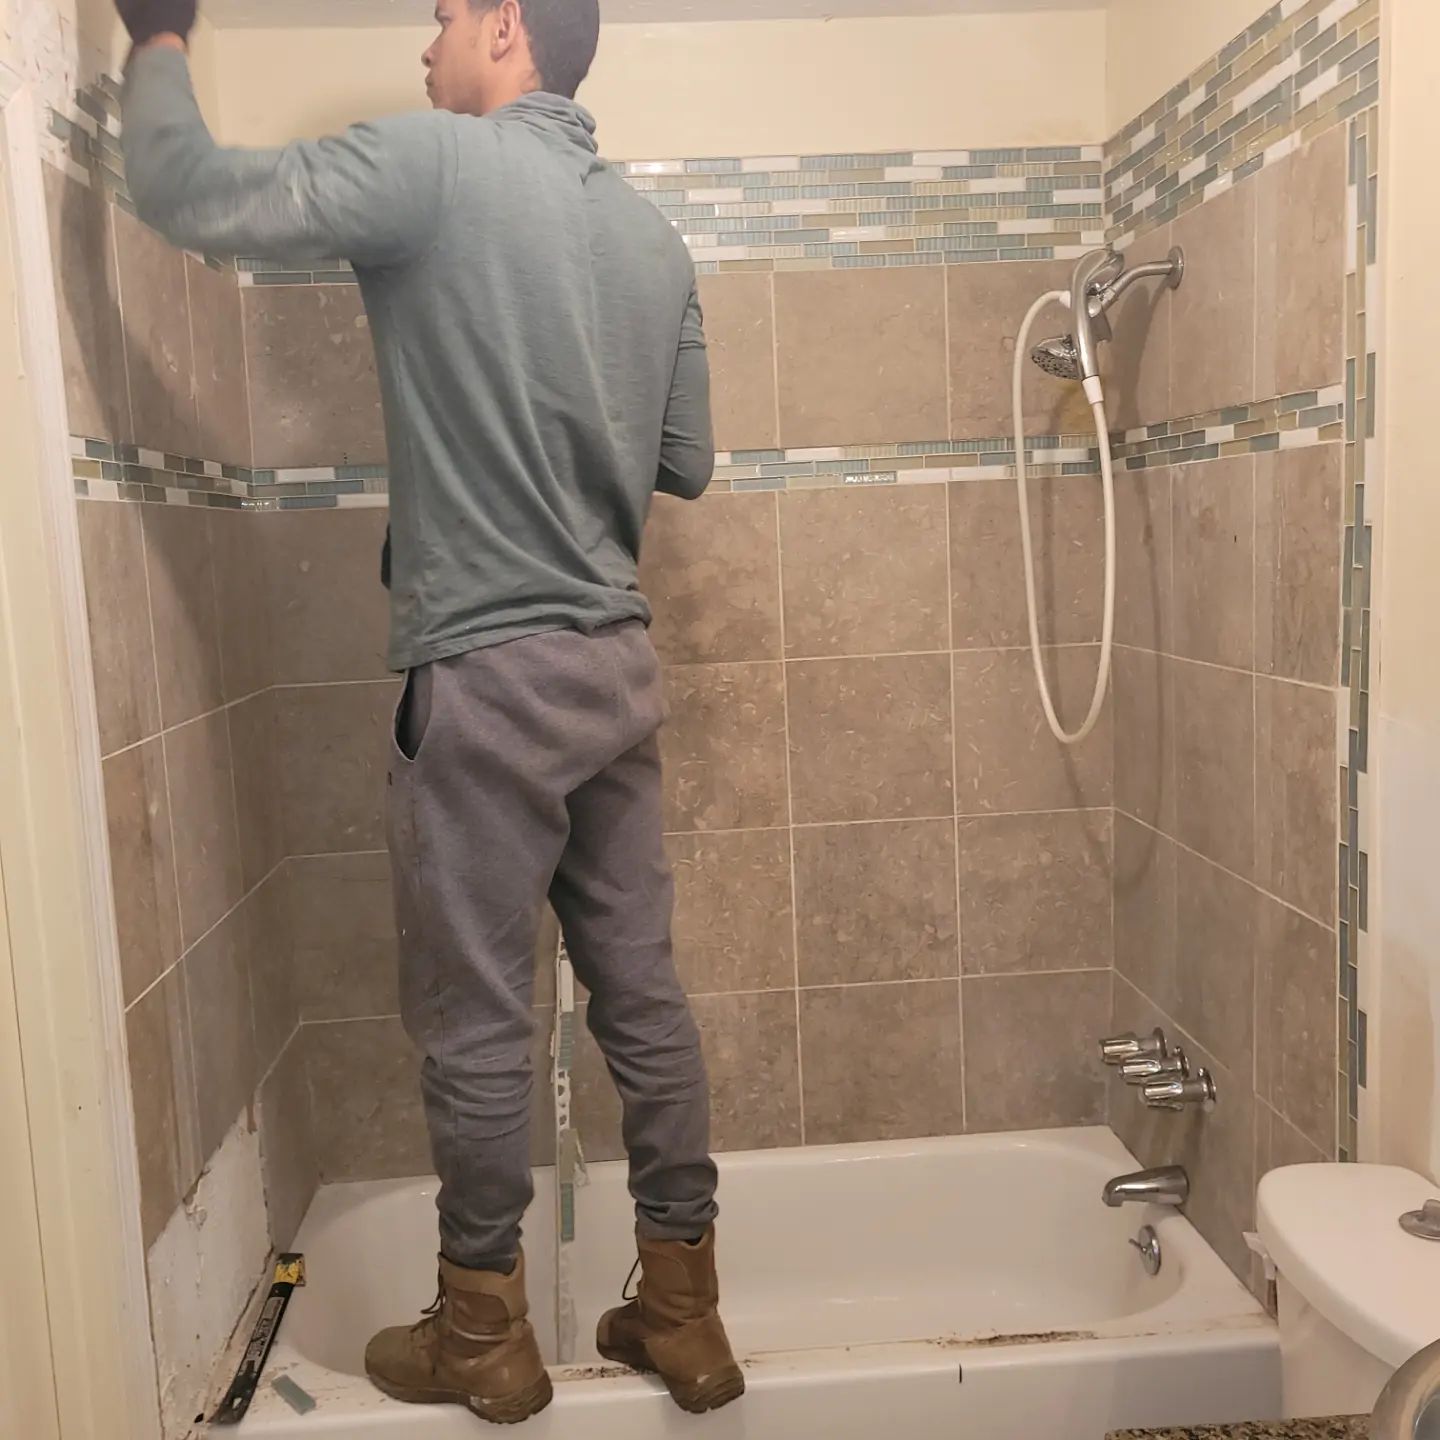 How Can I Find a Reliable and Trustworthy Plumber in My Area